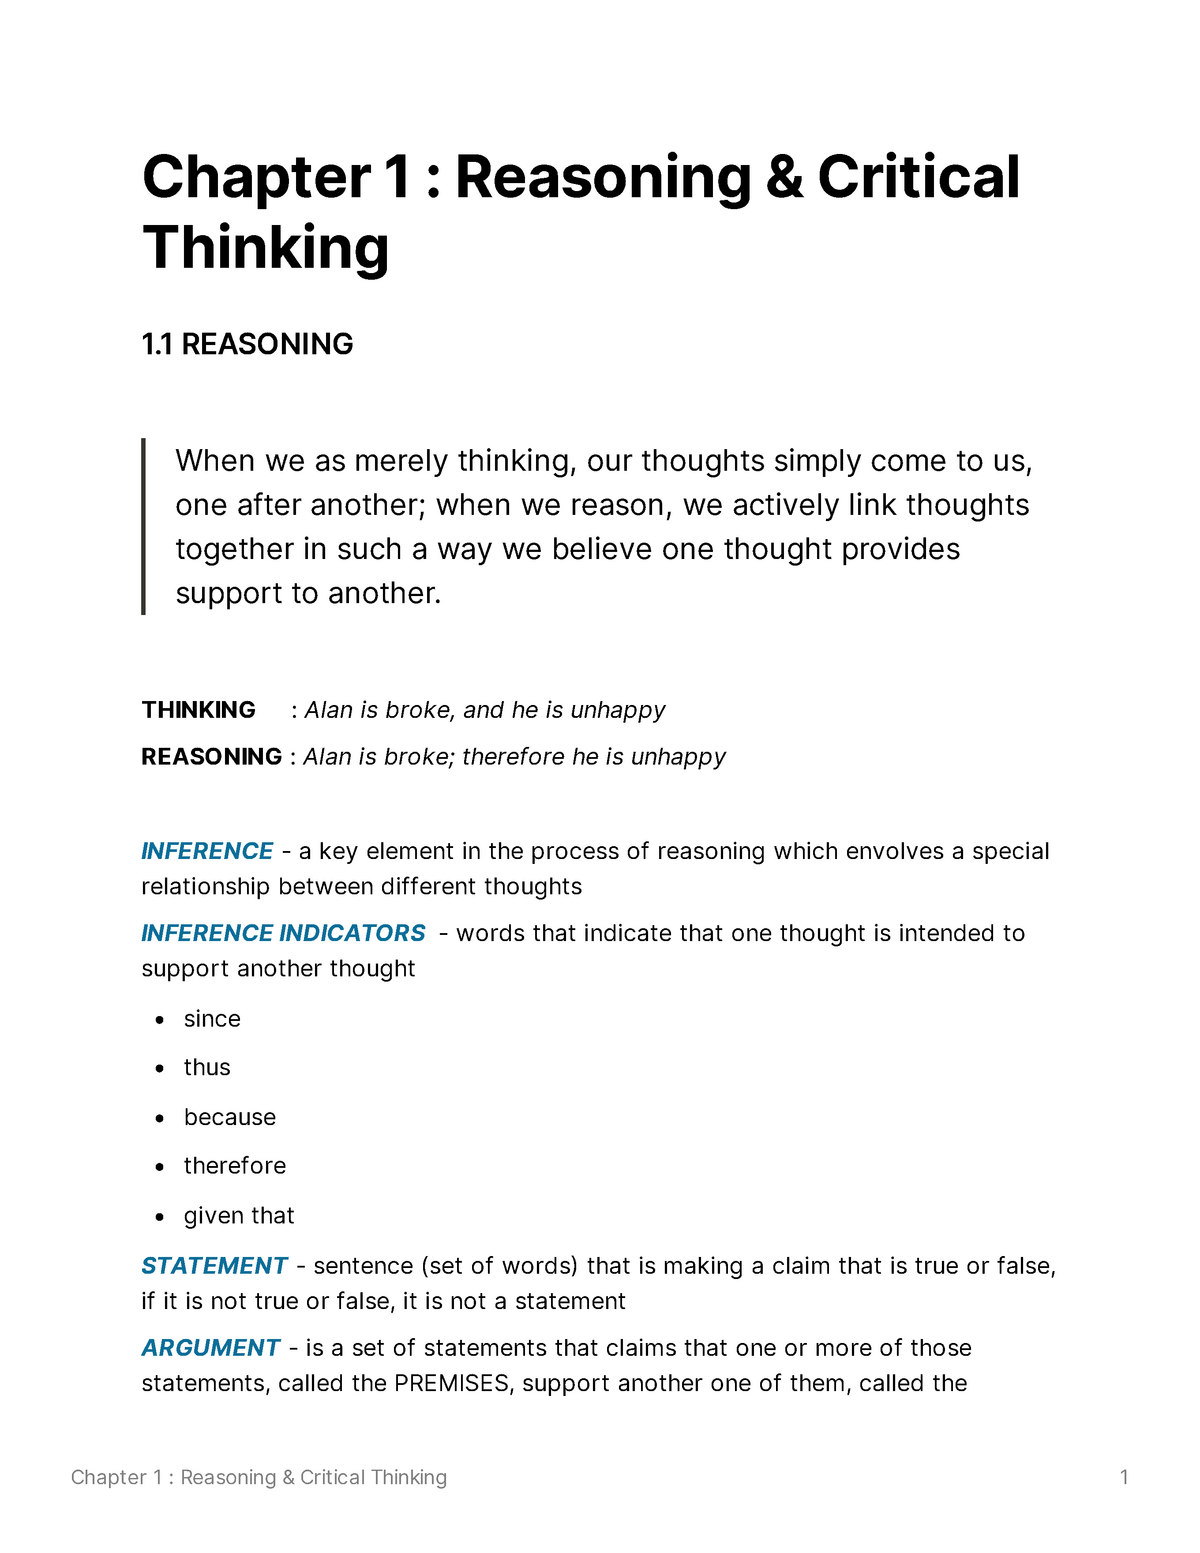 critical thinking chapter 1 summary